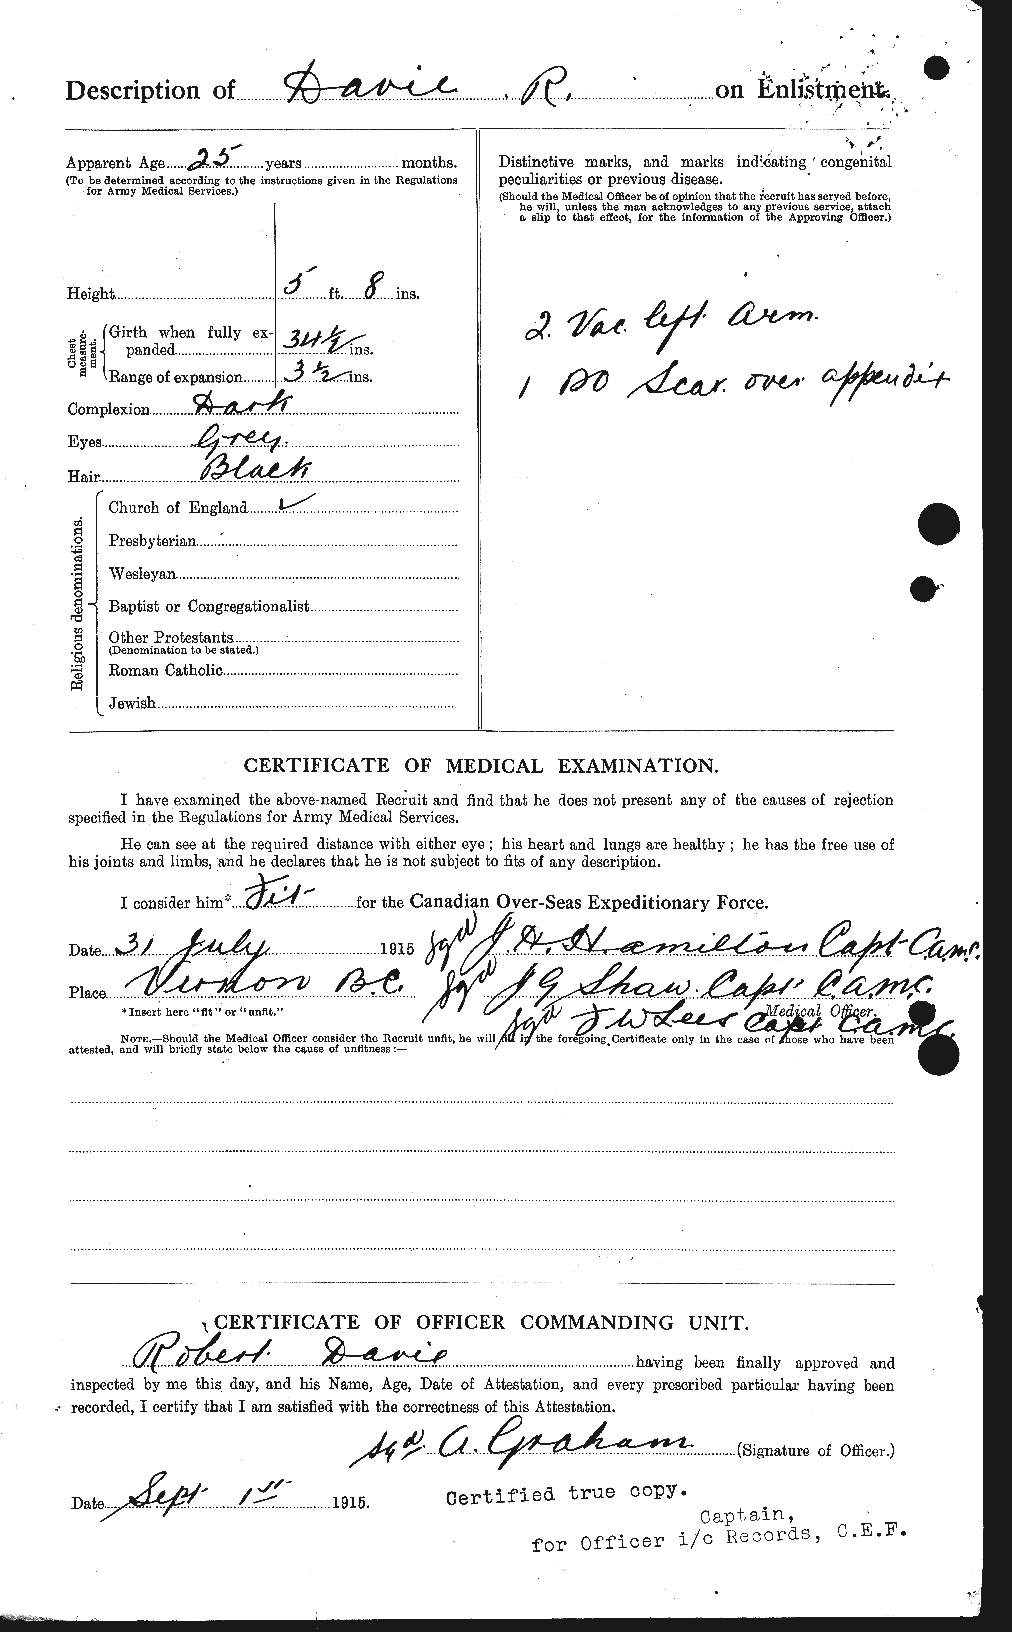 Personnel Records of the First World War - CEF 278842b